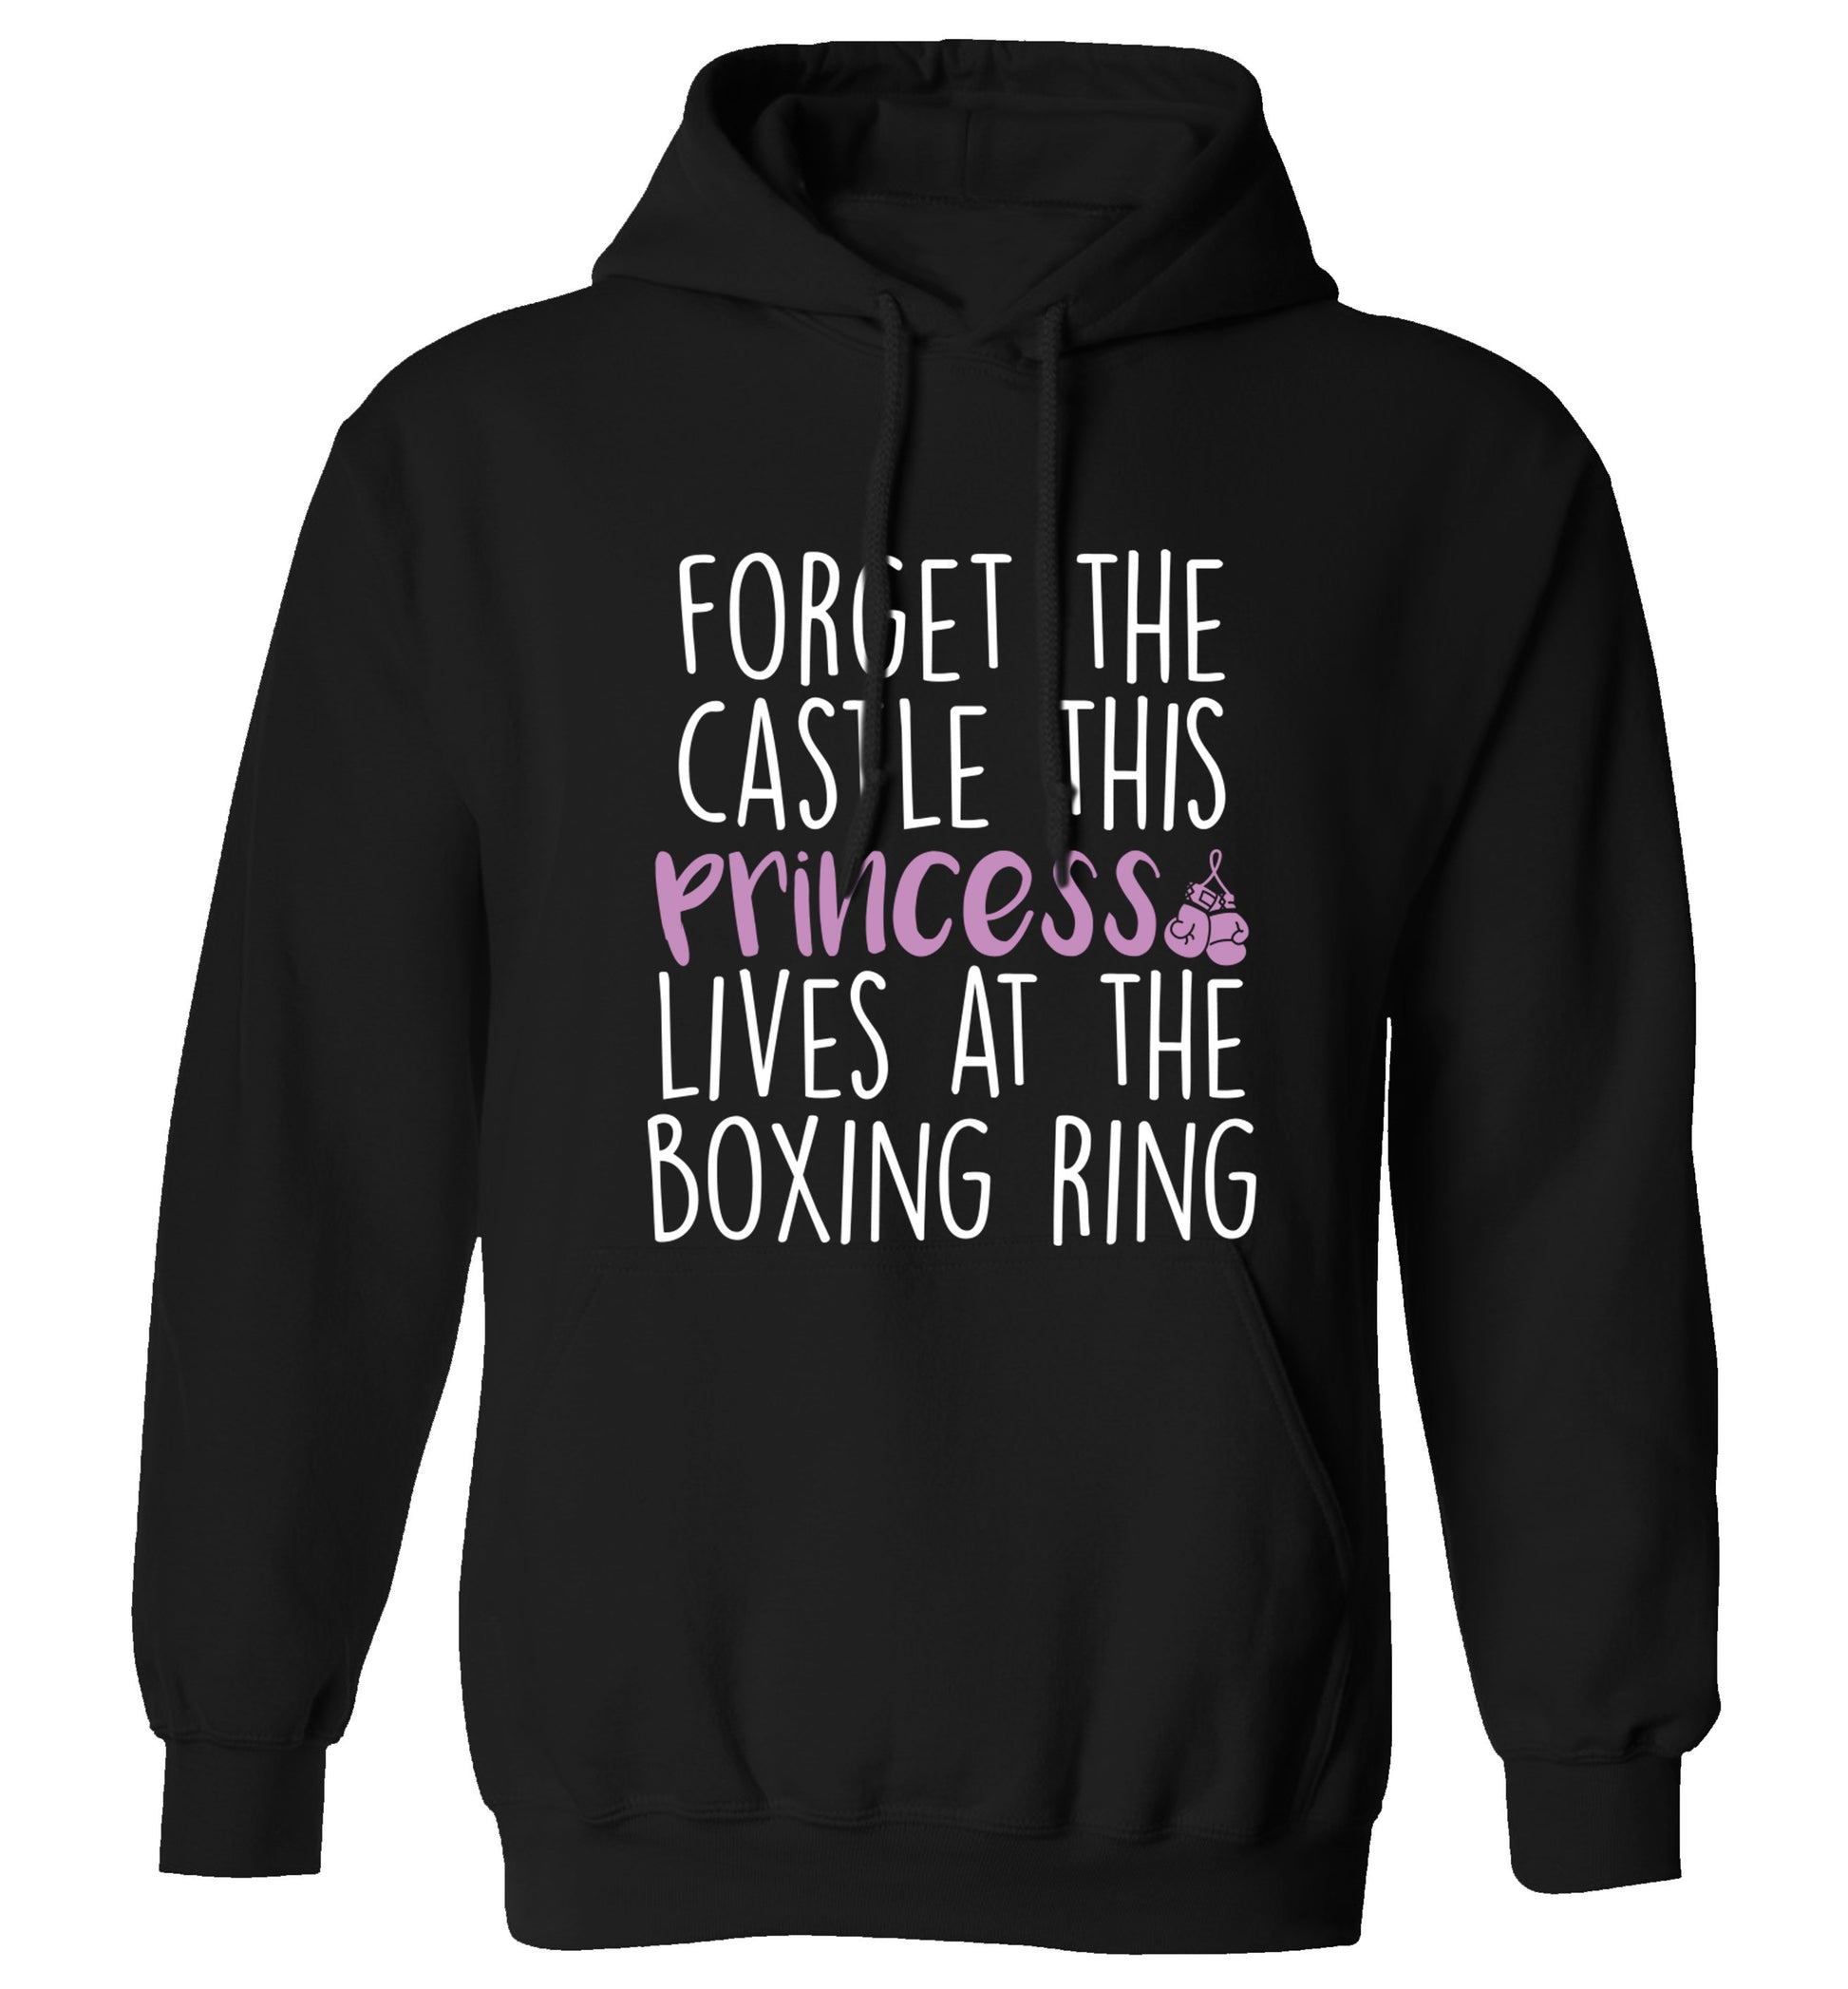 Forget the castle this princess lives at the boxing ring adults unisex black hoodie 2XL